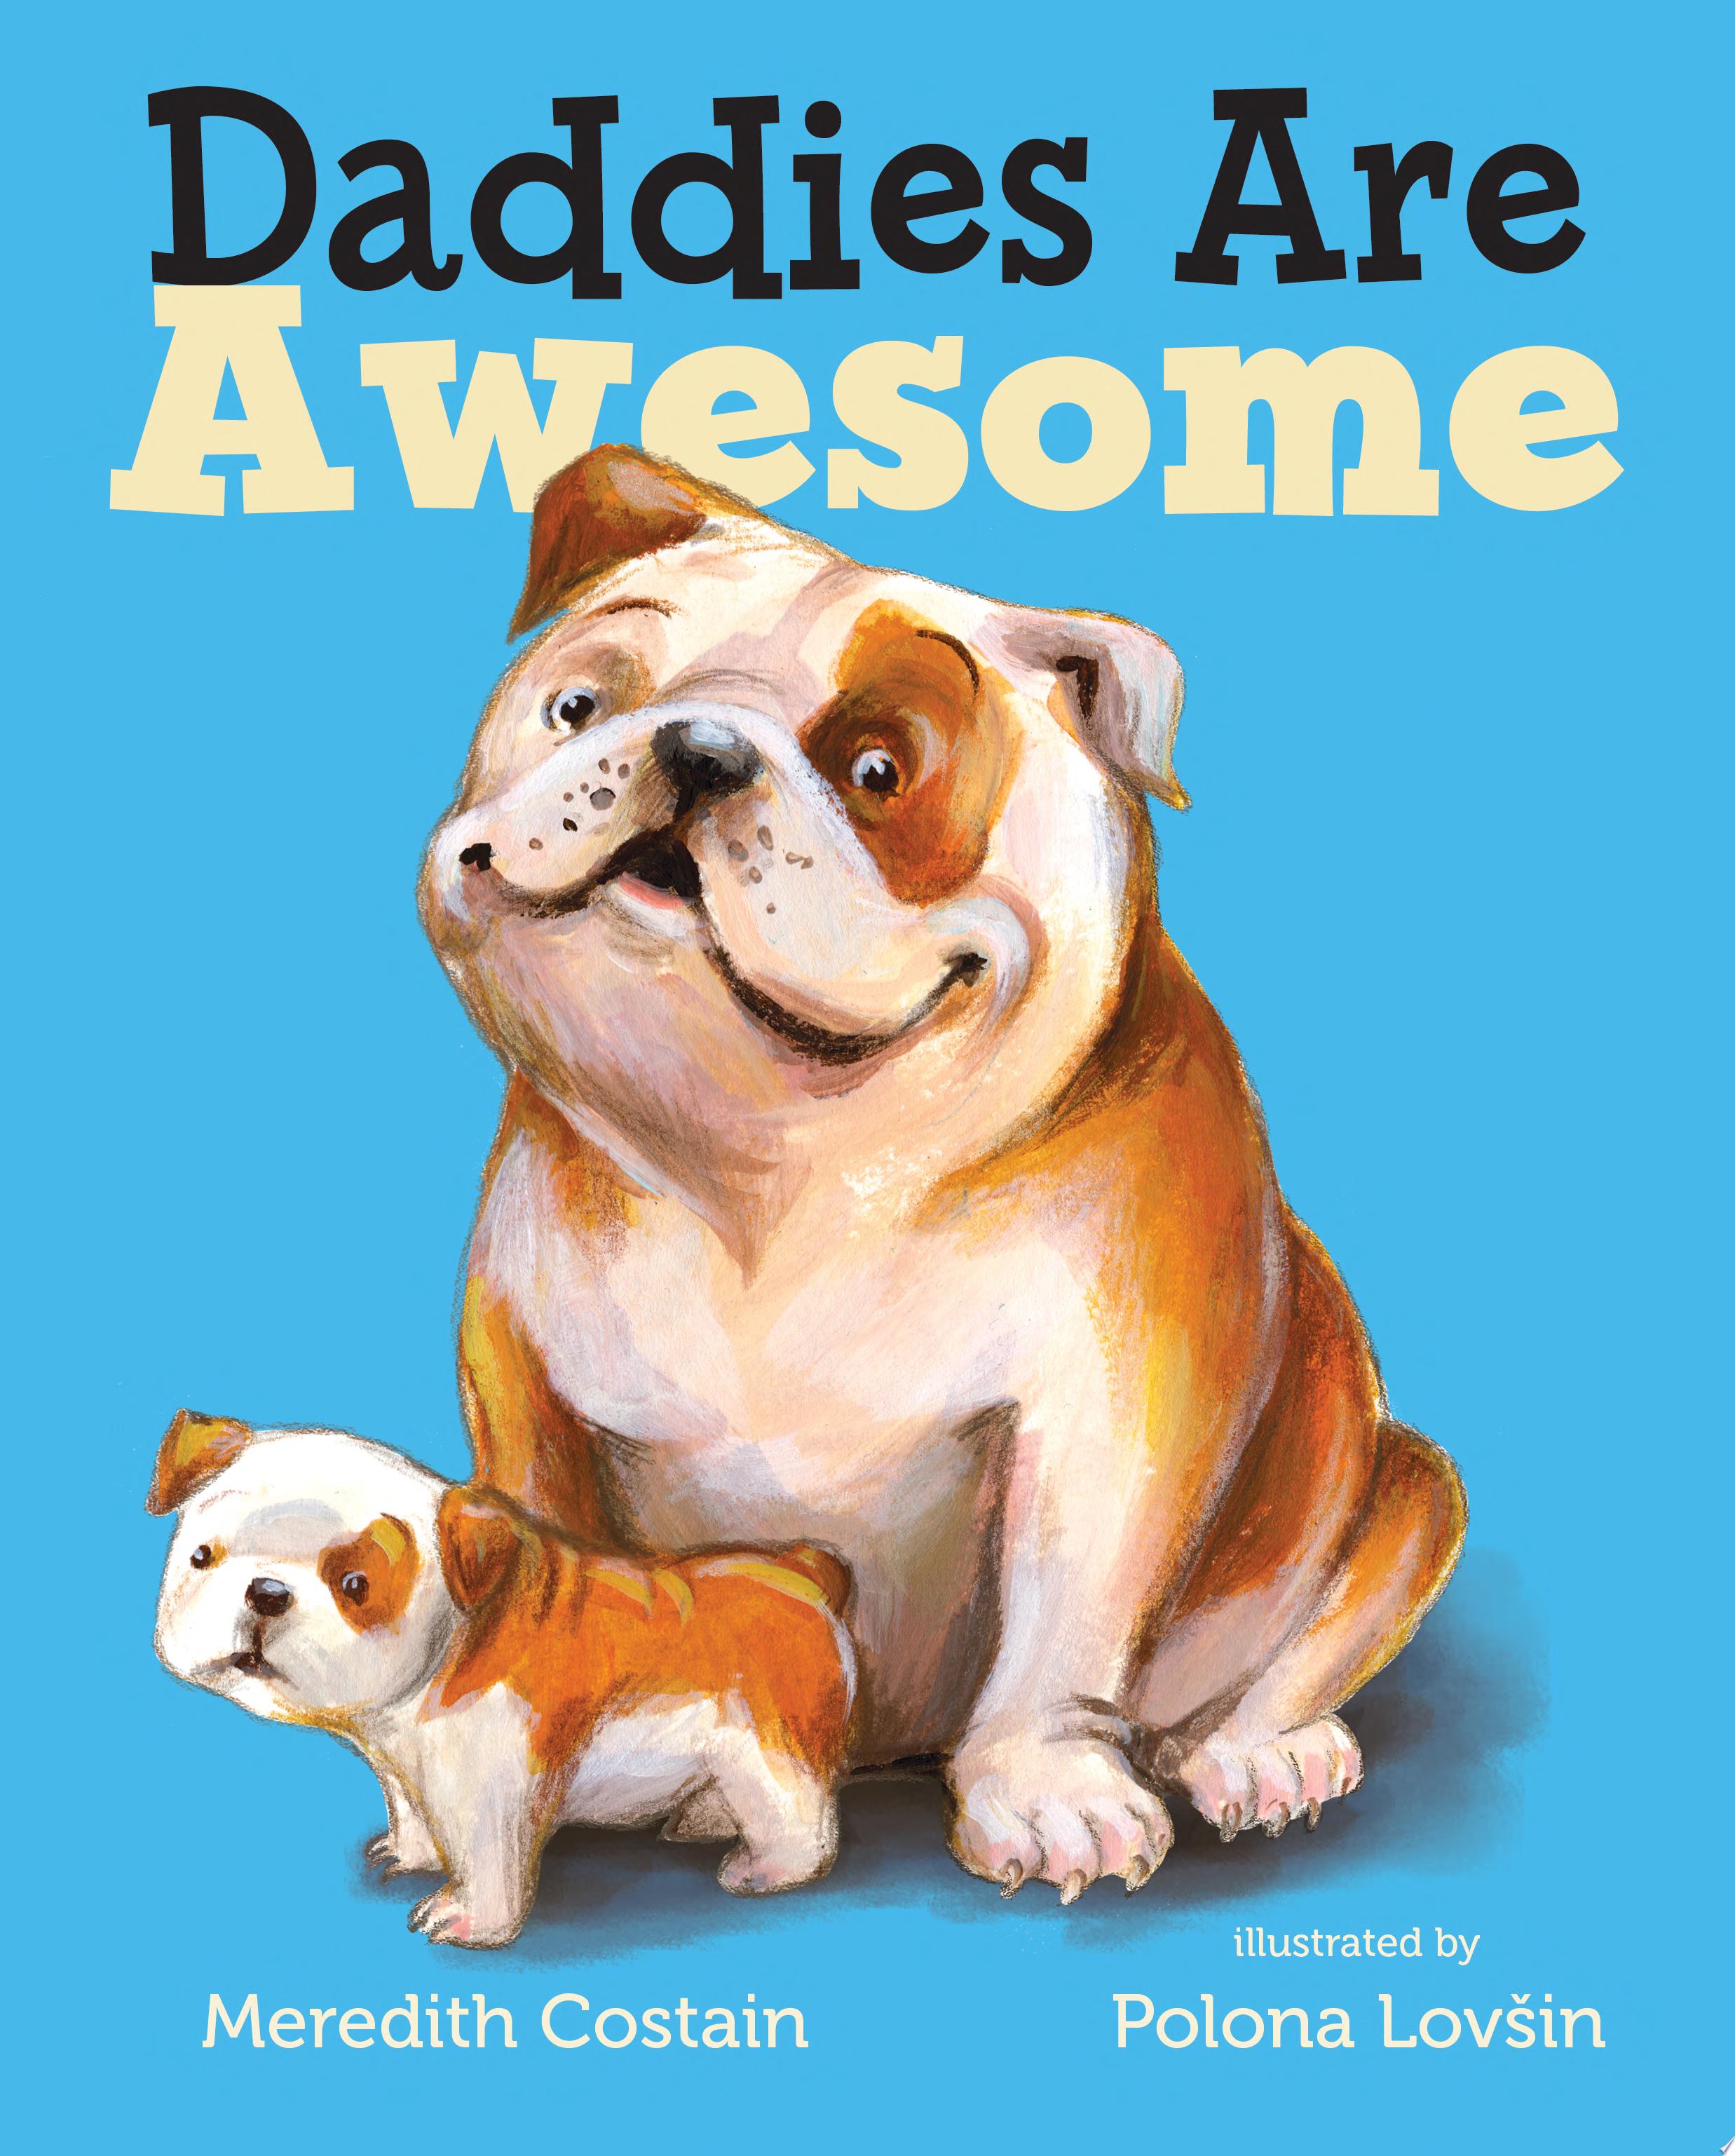 Image for "Daddies Are Awesome"